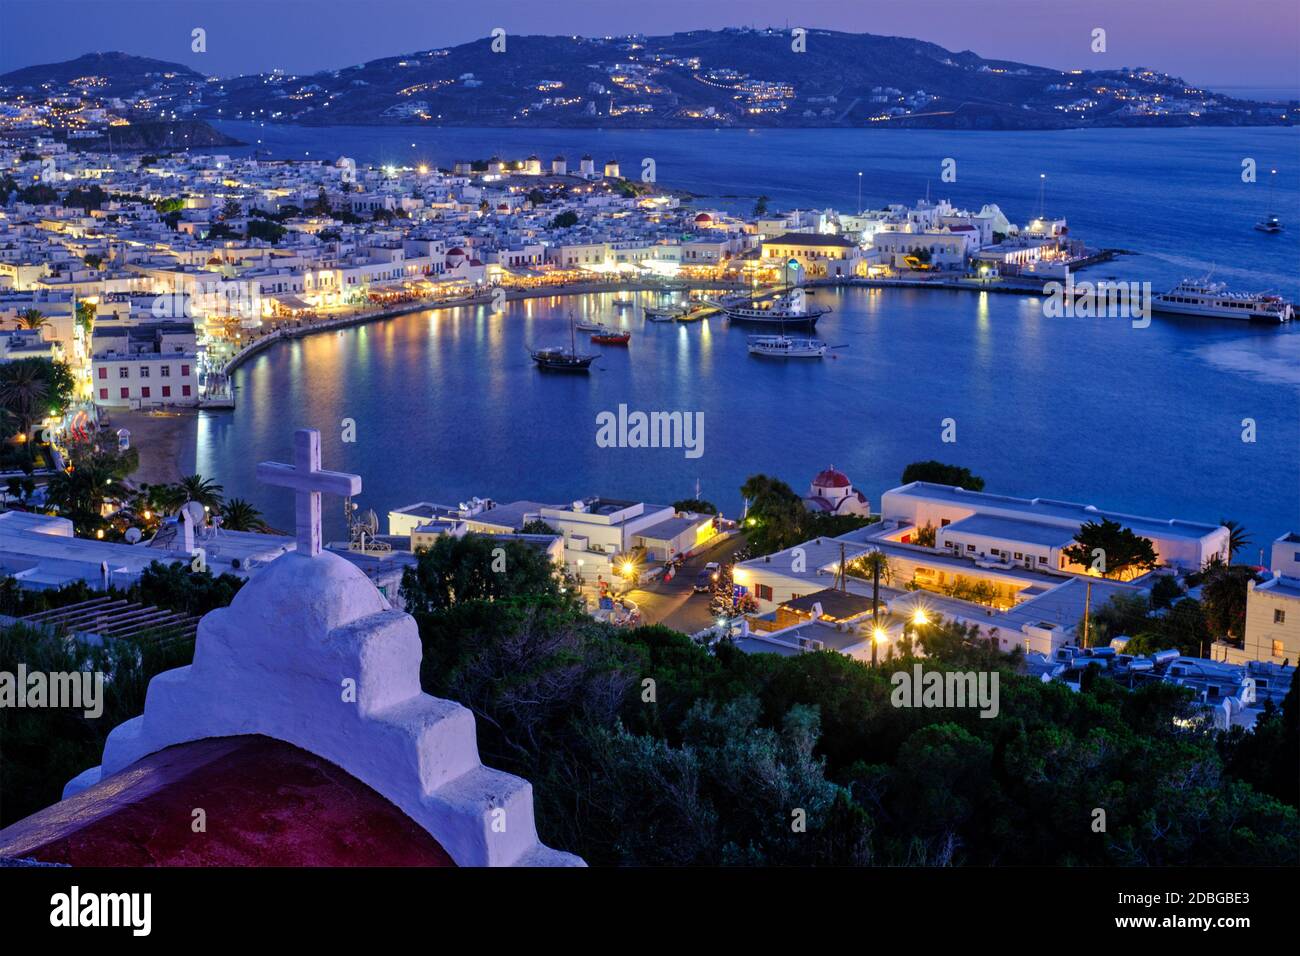 Mykonos Chora town Greek tourist holiday vacation destination with famous windmills port with boats yachts illuminated in evening blue hour with St. B Stock Photo